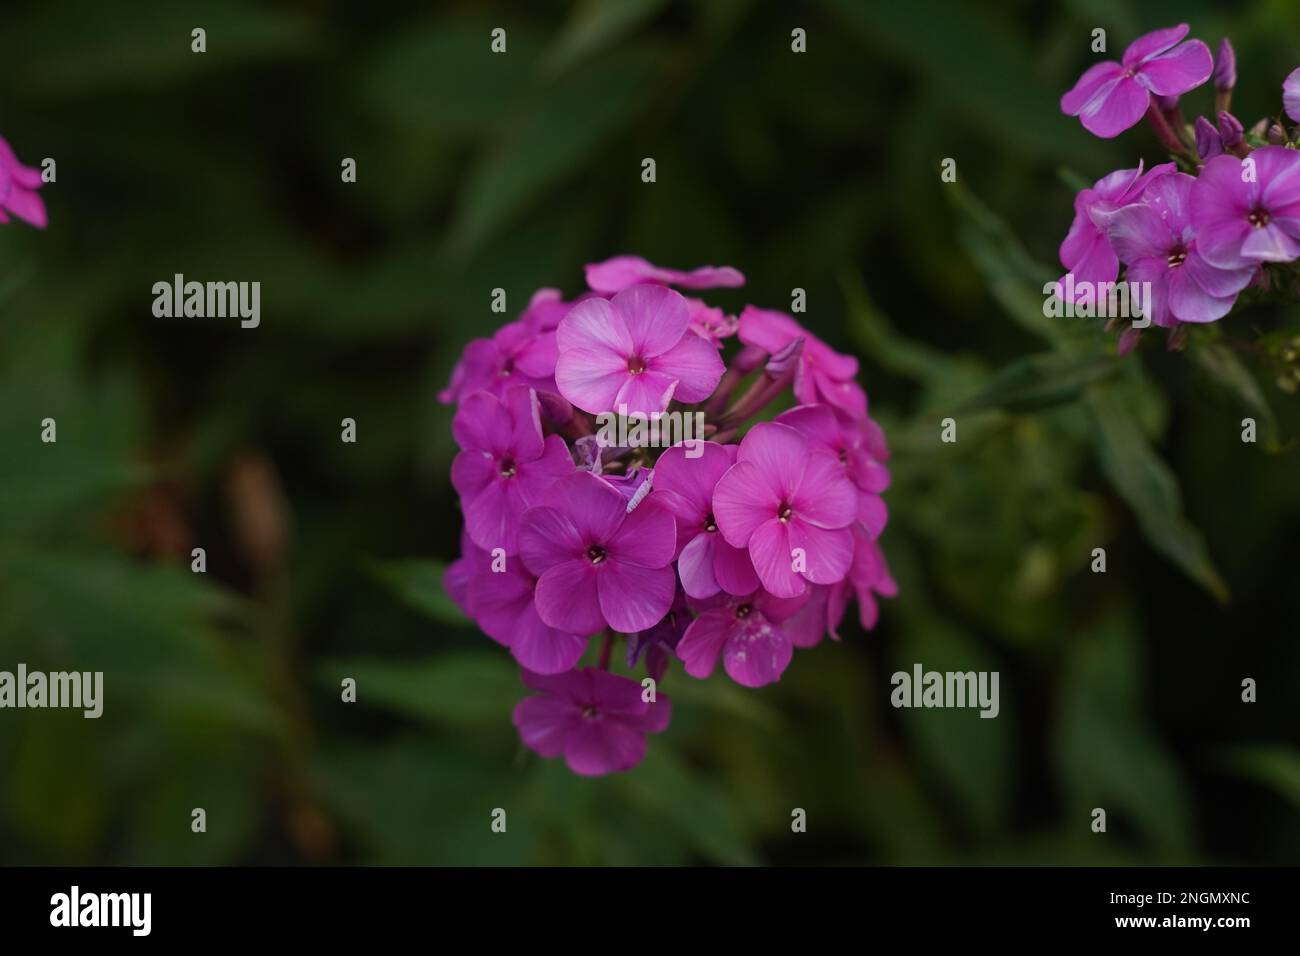 Purple flame flowers of phlox close up. Stock Photo